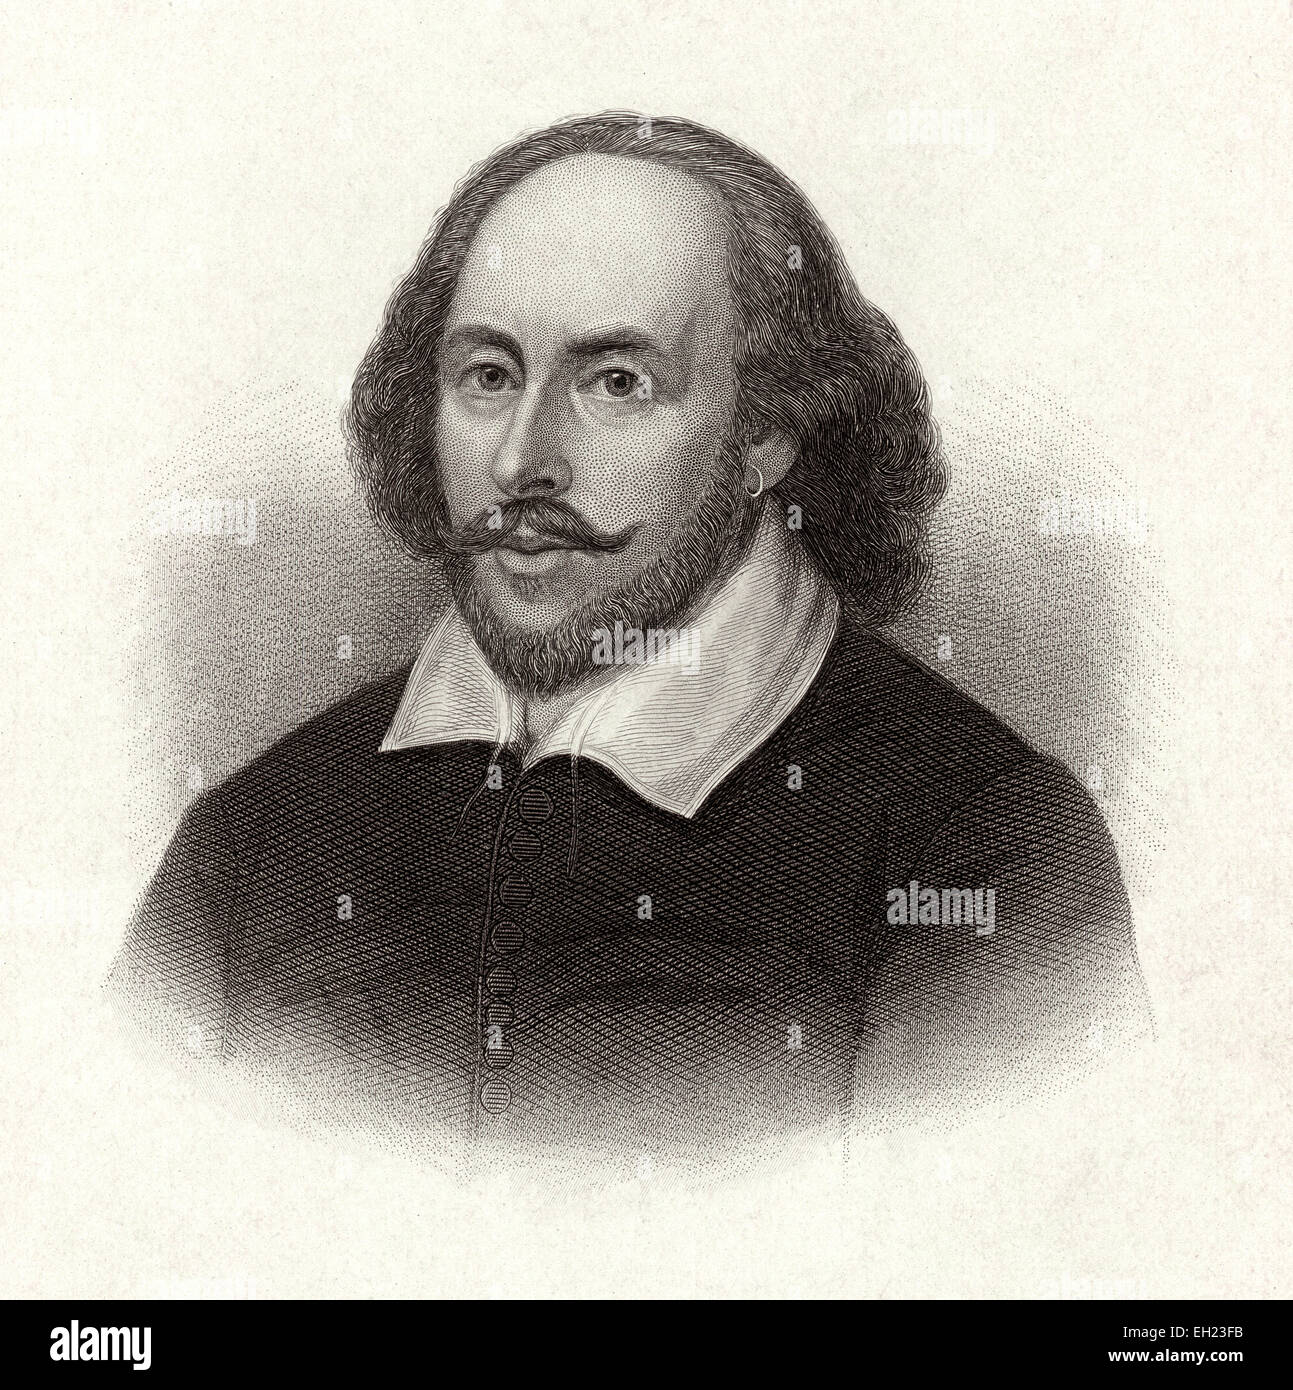 Antique c1885 steel engraving, William Shakespeare. William Shakespeare (26 April 1564 (baptised) - 23 April 1616) was an English poet, playwright, and actor, widely regarded as the greatest writer in the English language and the world's pre-eminent dramatist. Stock Photo